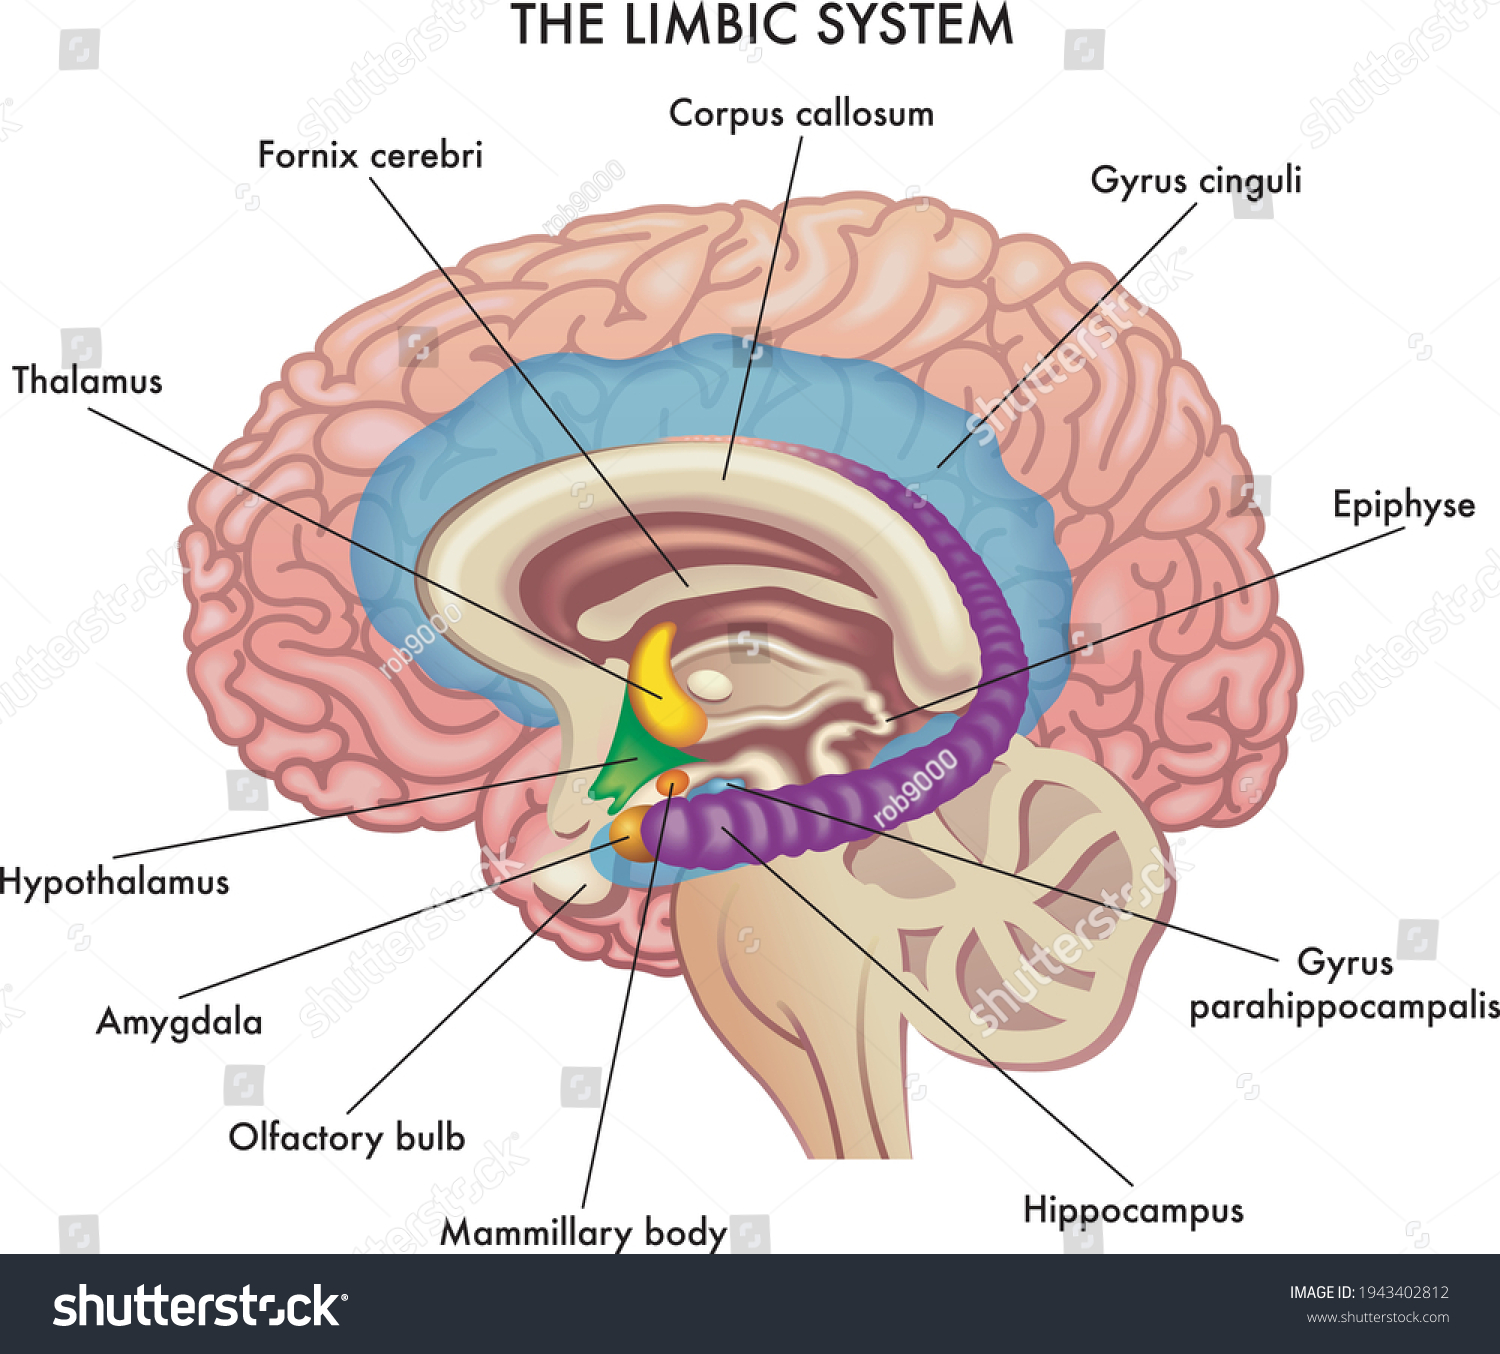 SVG of Medical illustration shows the major organs of the Limbic System of the human brain, with annotations. svg